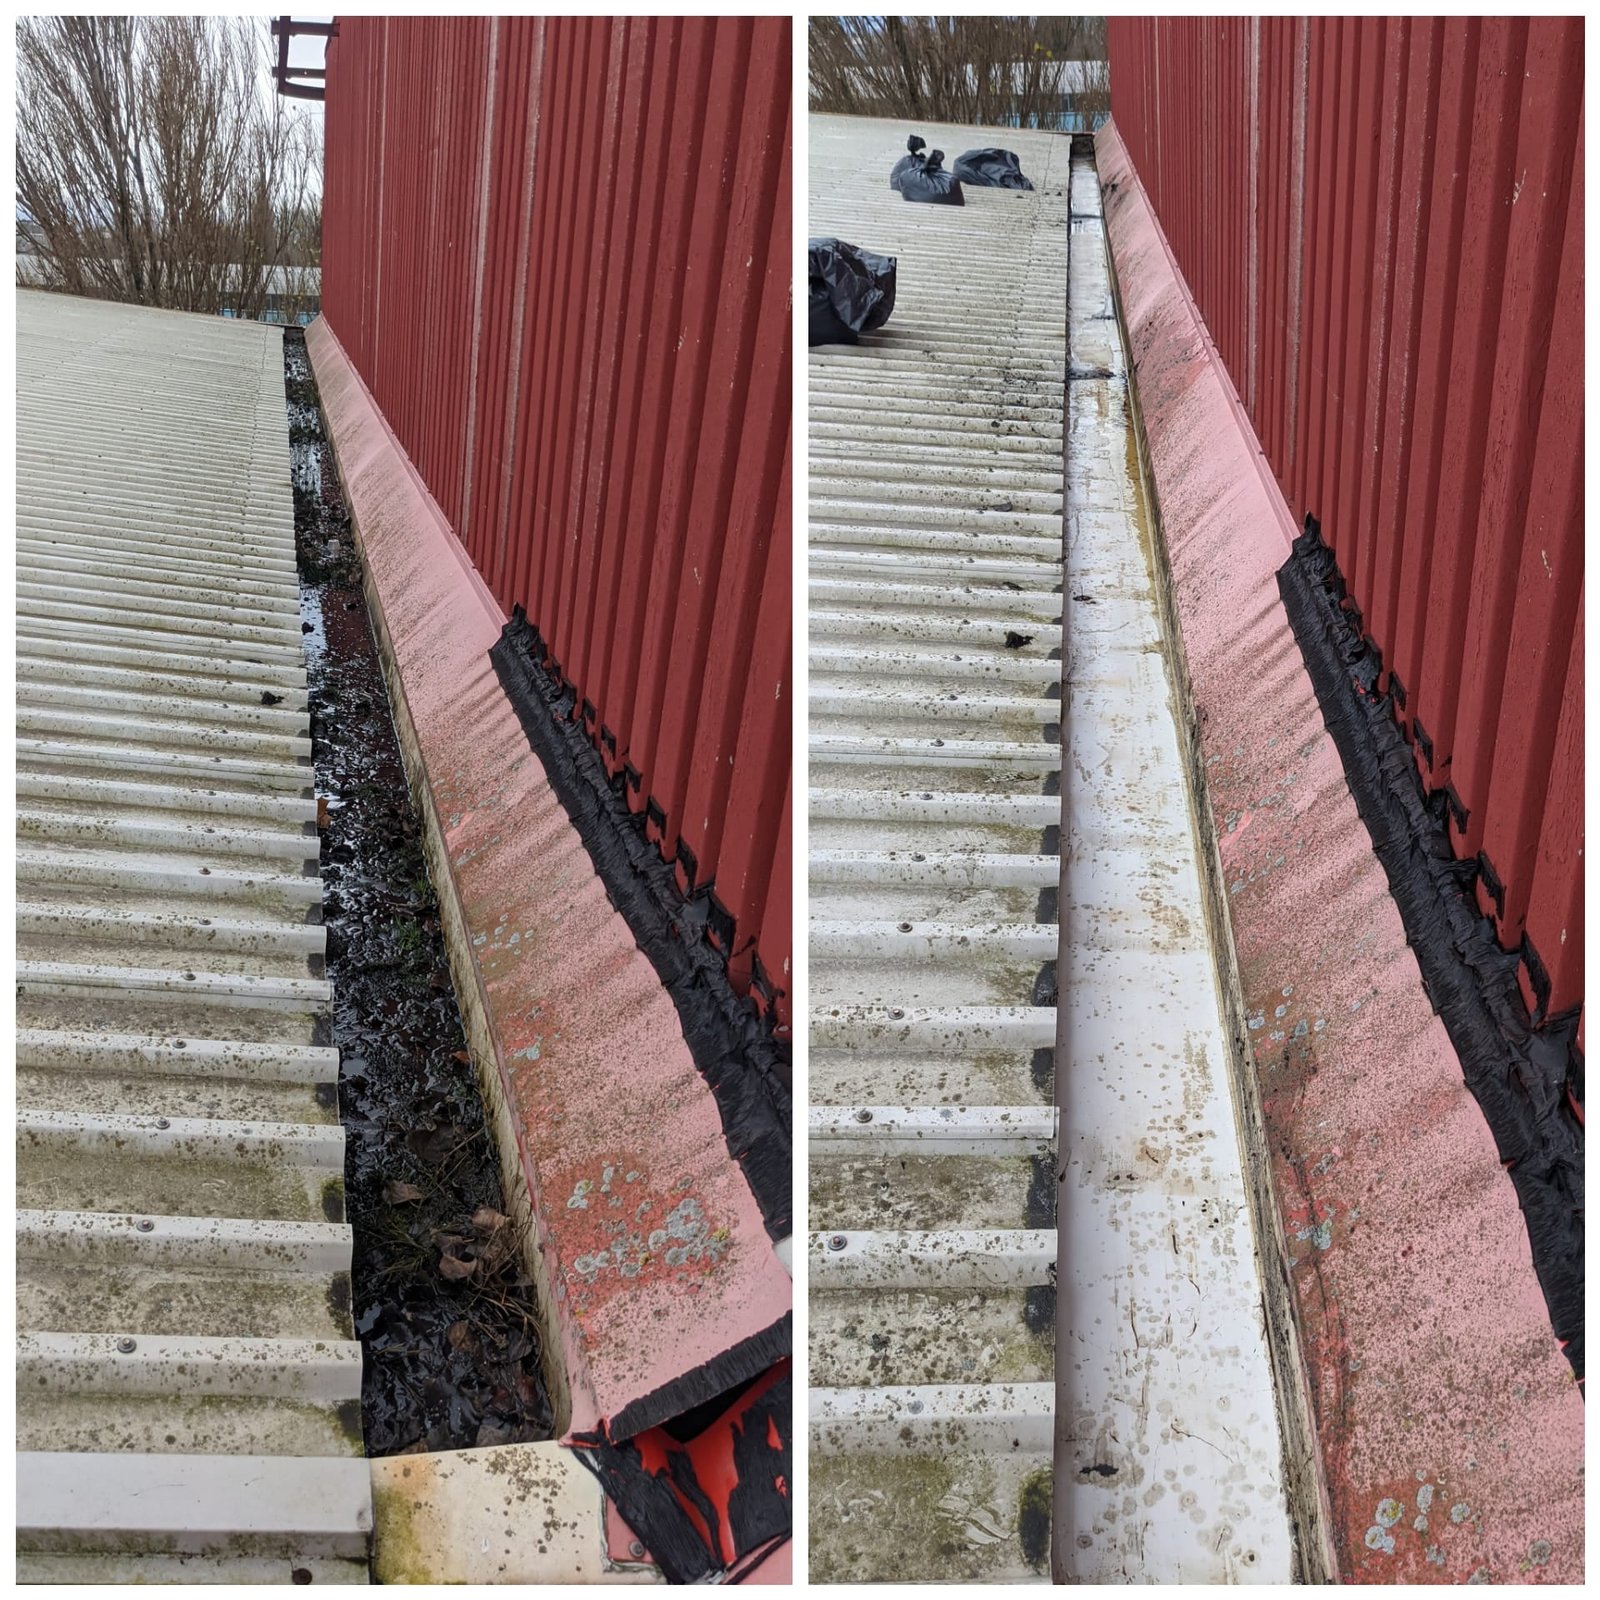 From Spring to Winter: A Year-Round Gutter Cleaning Plan